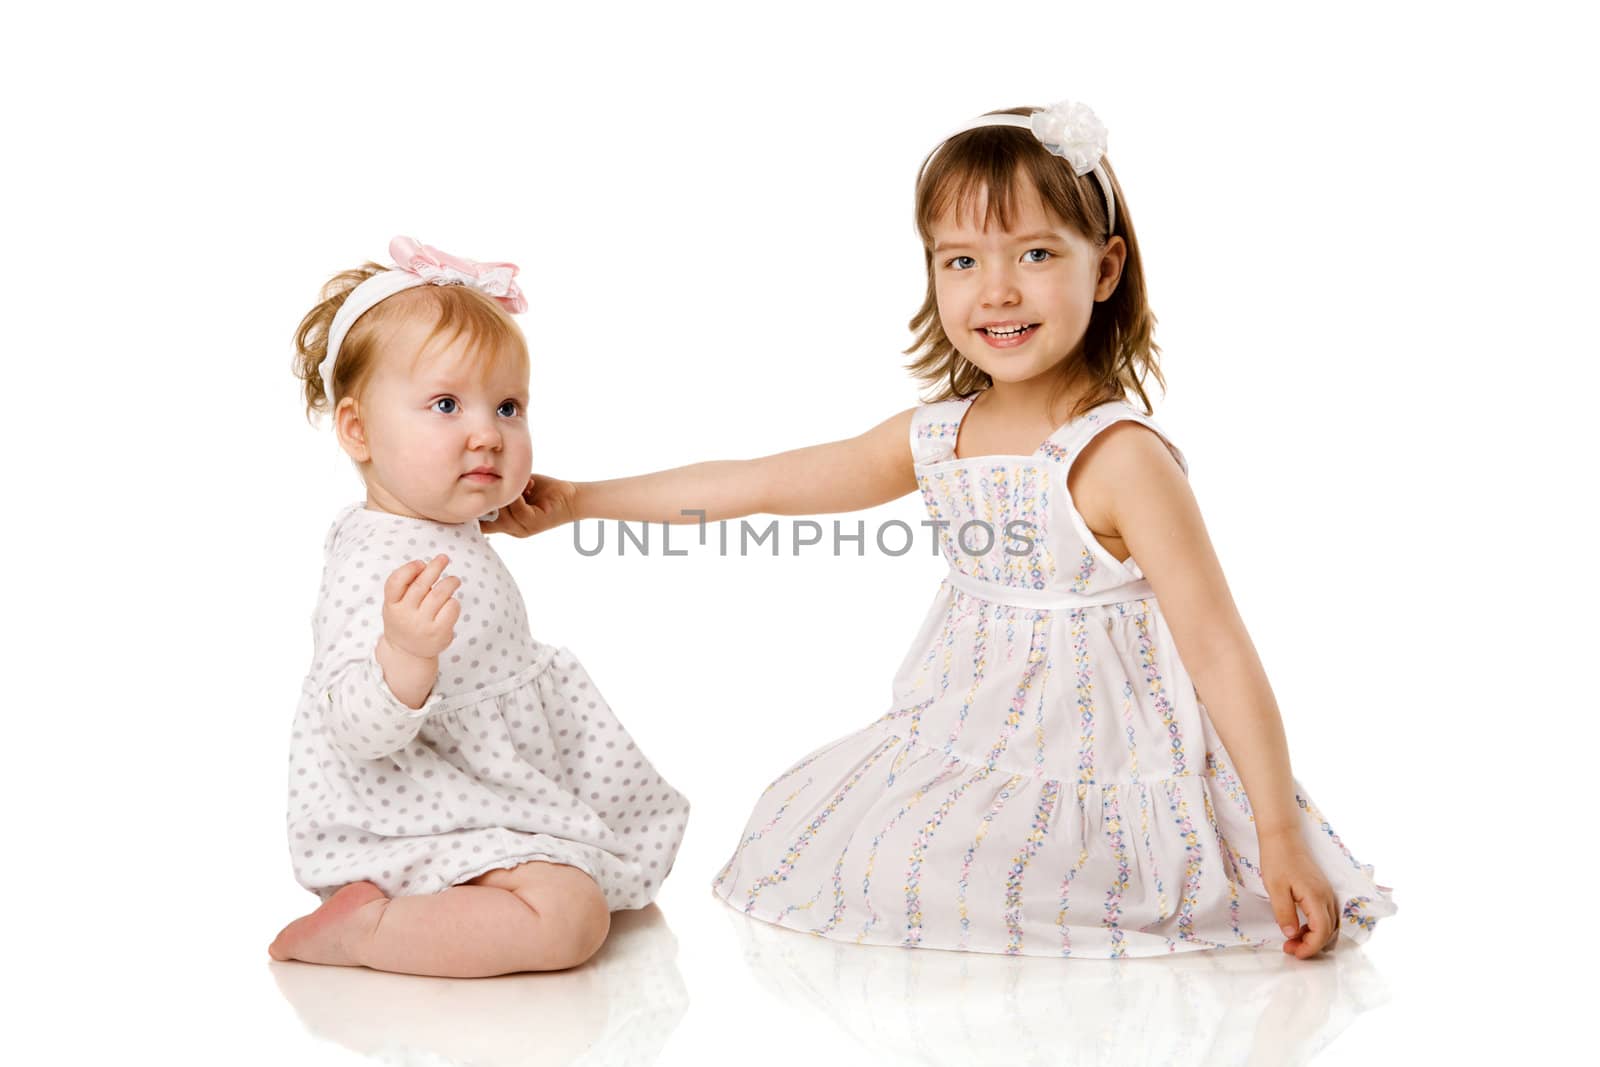 Two little Sisters playing together isolated on white